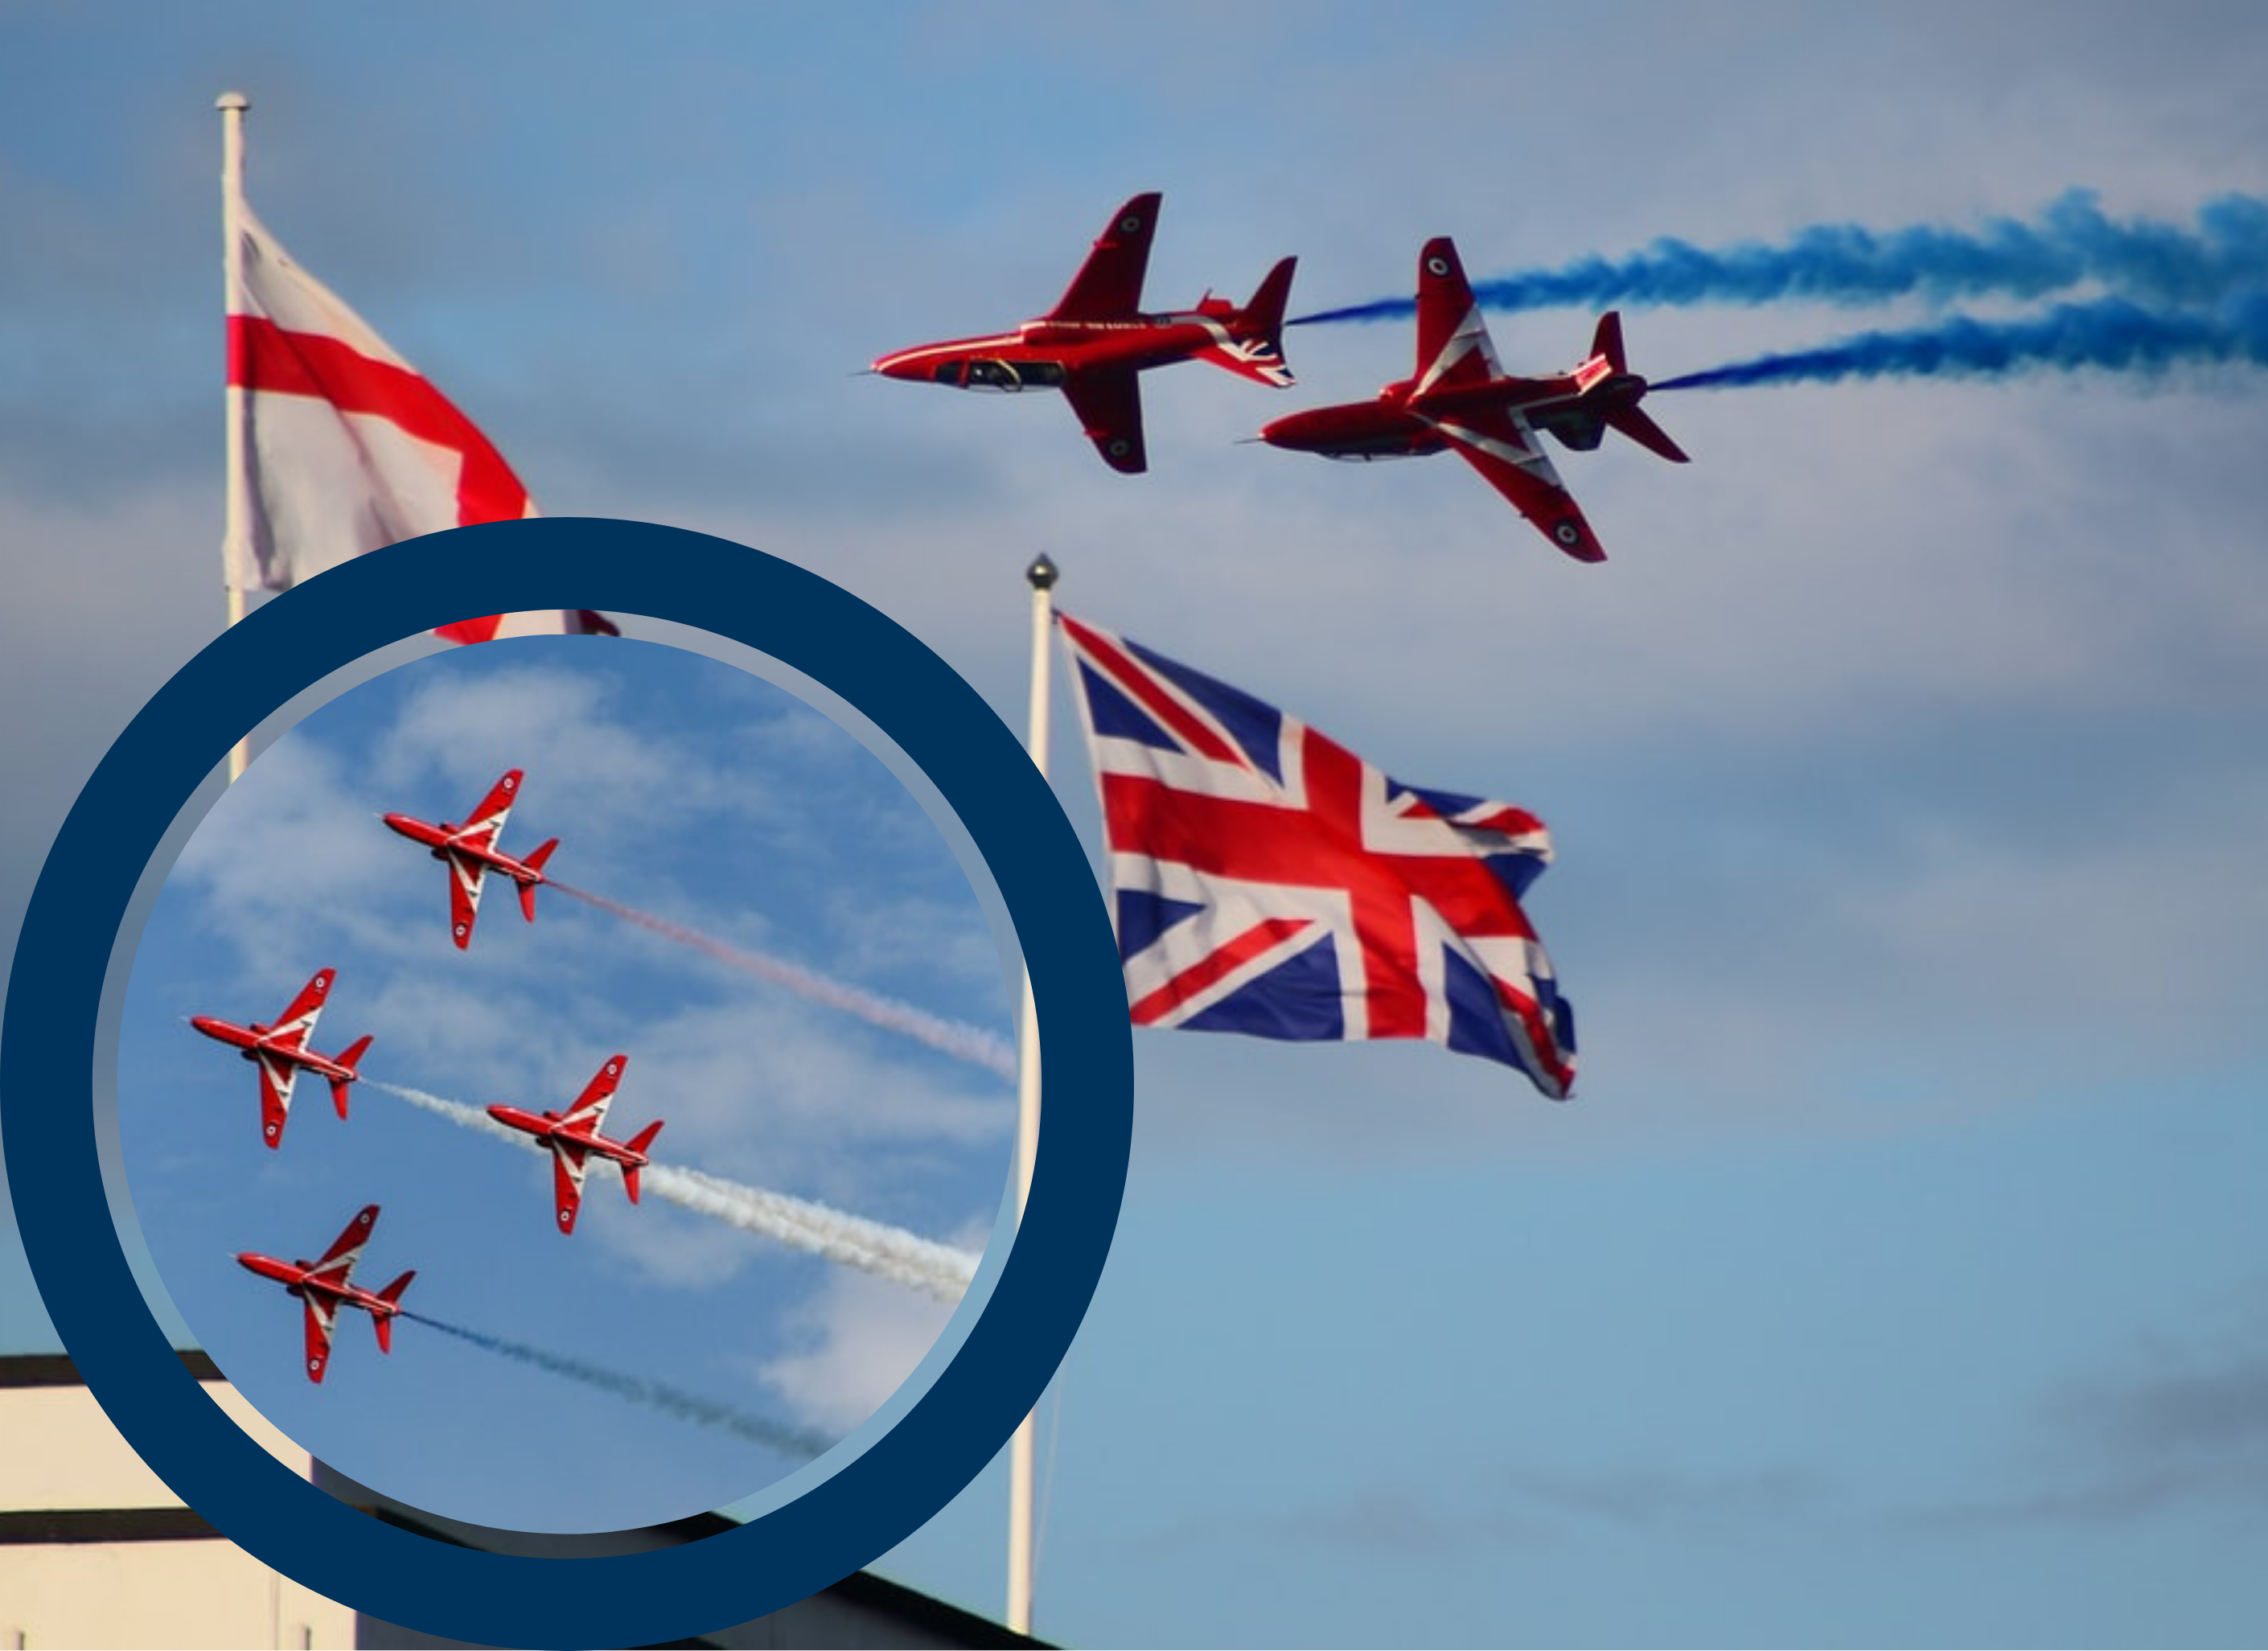 NEWS | The red arrows will be visible over parts of Herefordshire today – MORE DETAILS